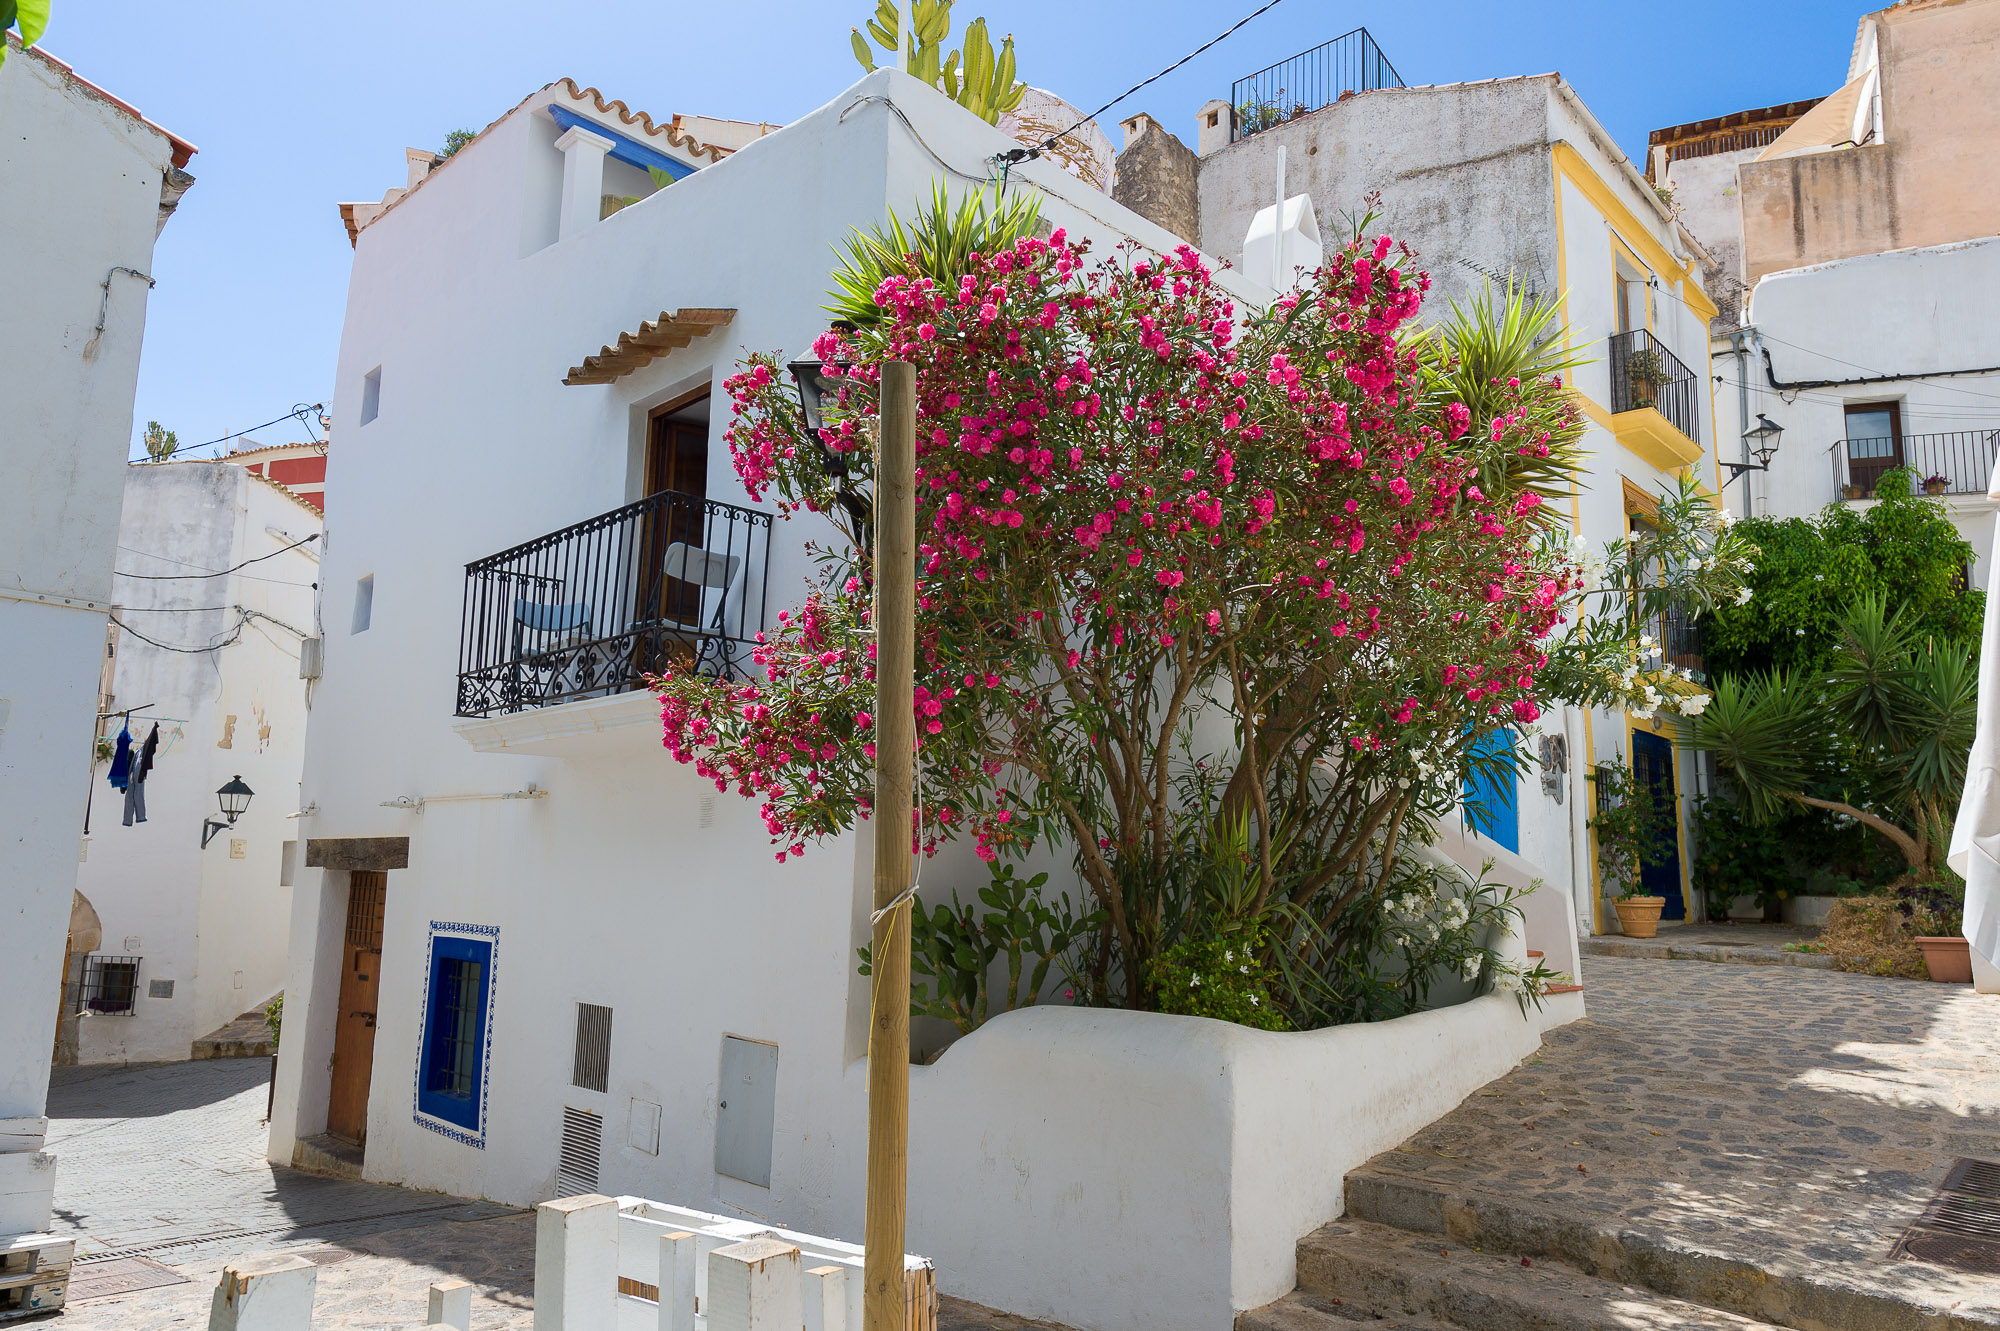 House in the old town from Ibiza